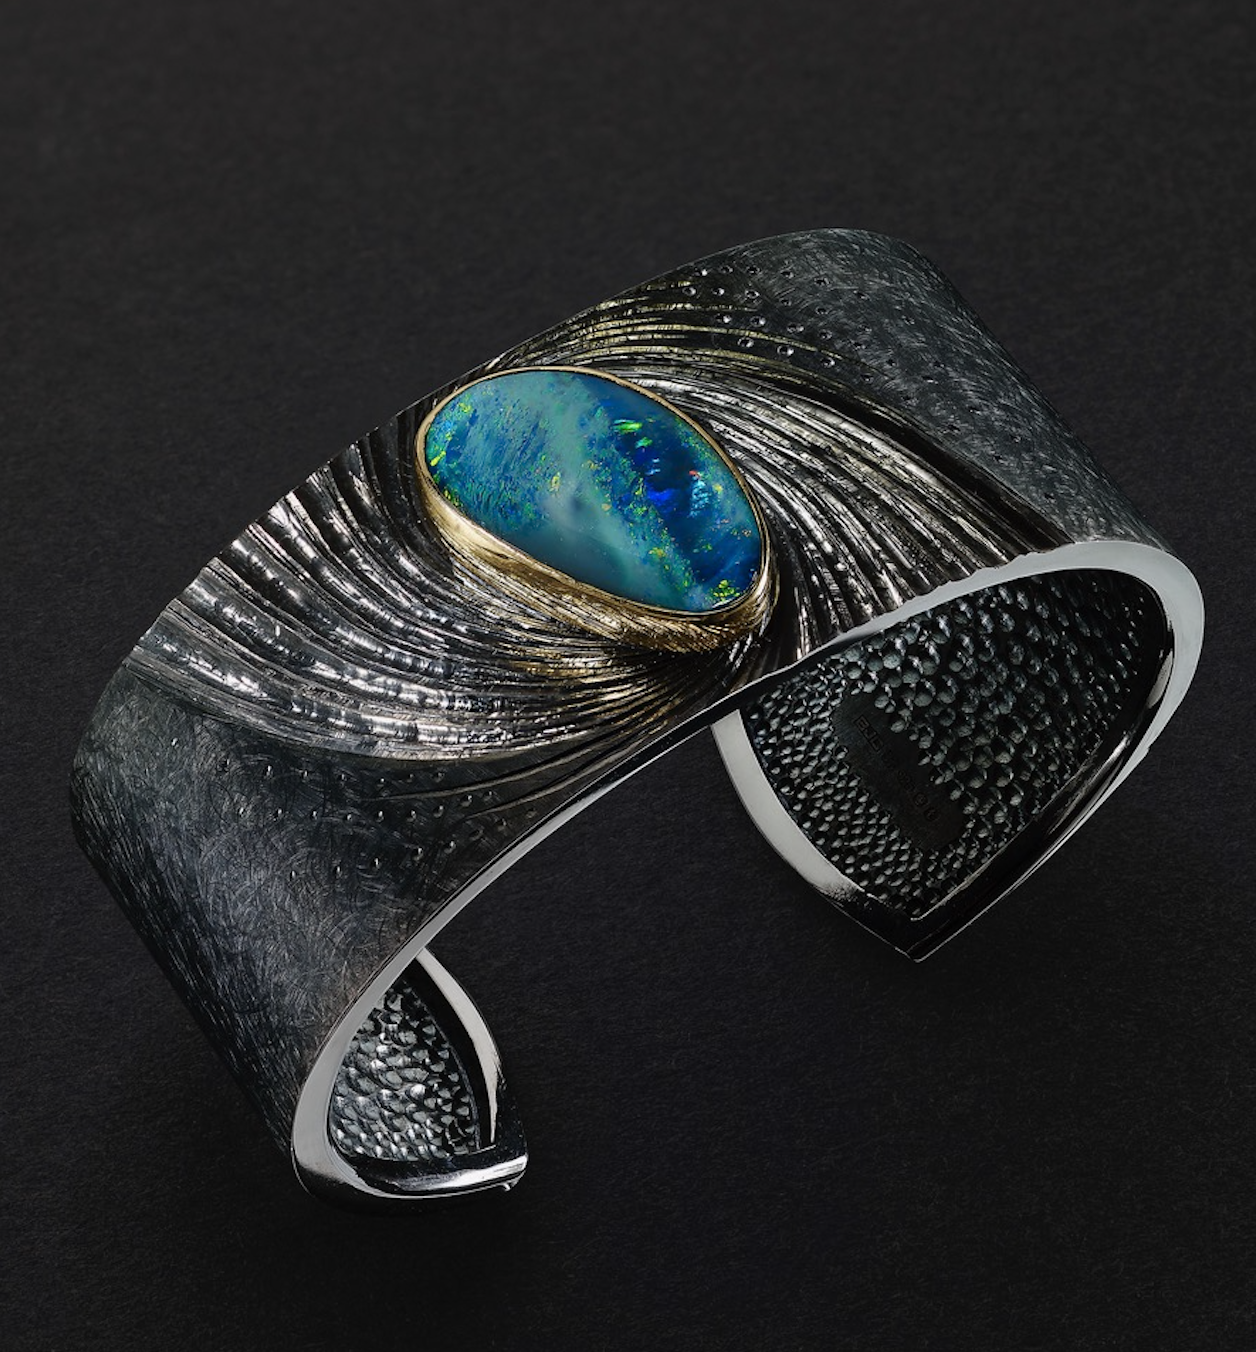 Alan Craxford, NewsCuff, silver, hand engraved and black rhodium plated, Australian Opal set in 22k gold.